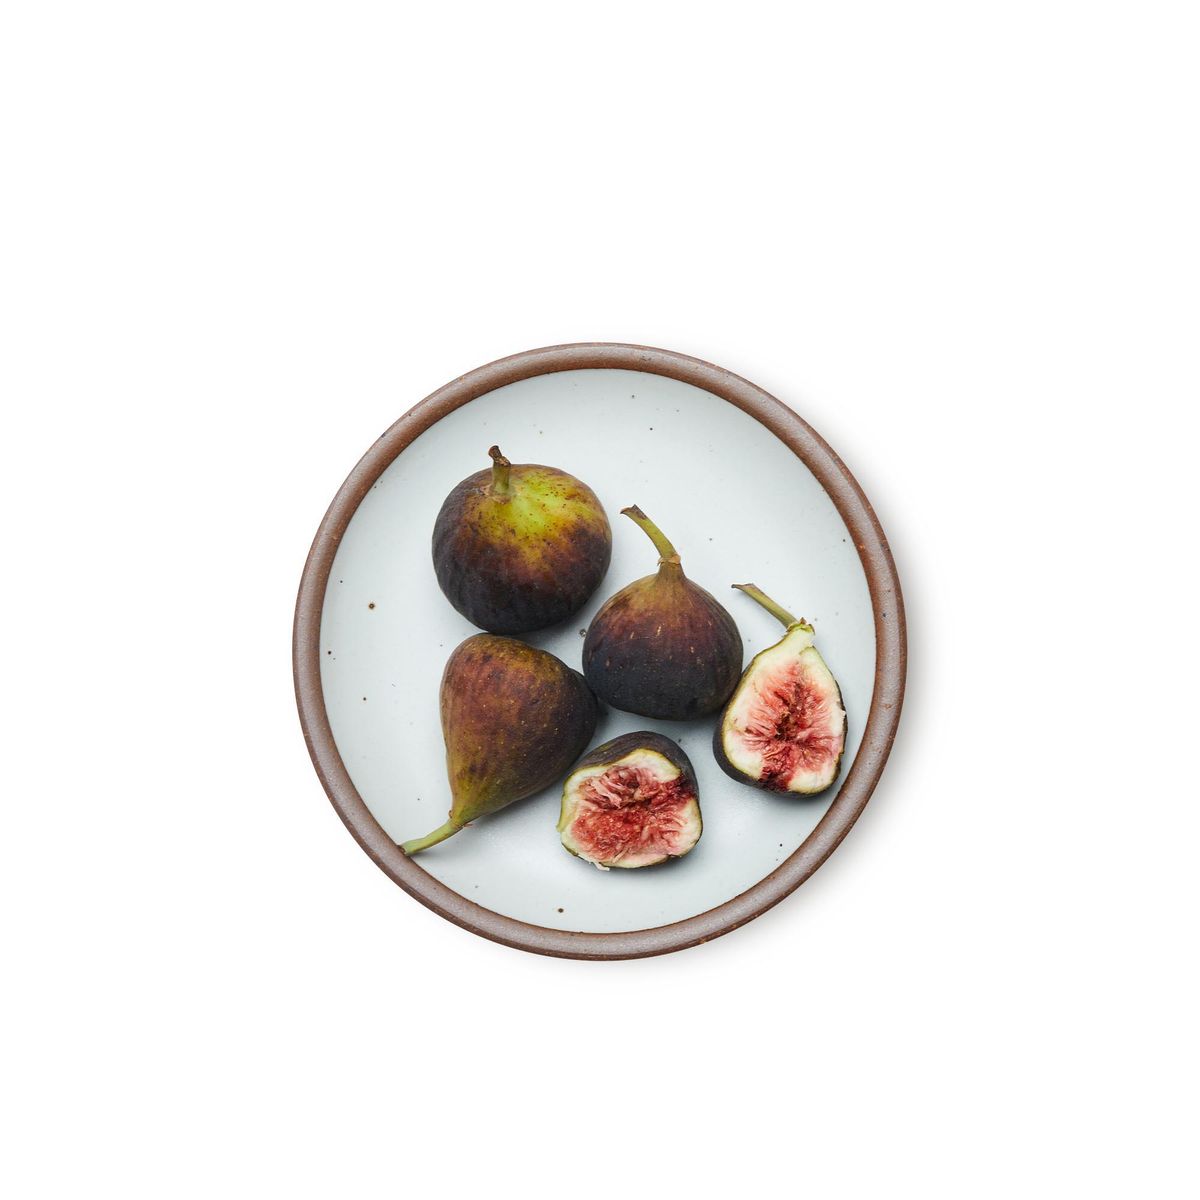 A medium sized ceramic plate in a cool white color featuring iron speckles and an unglazed rim, with figs